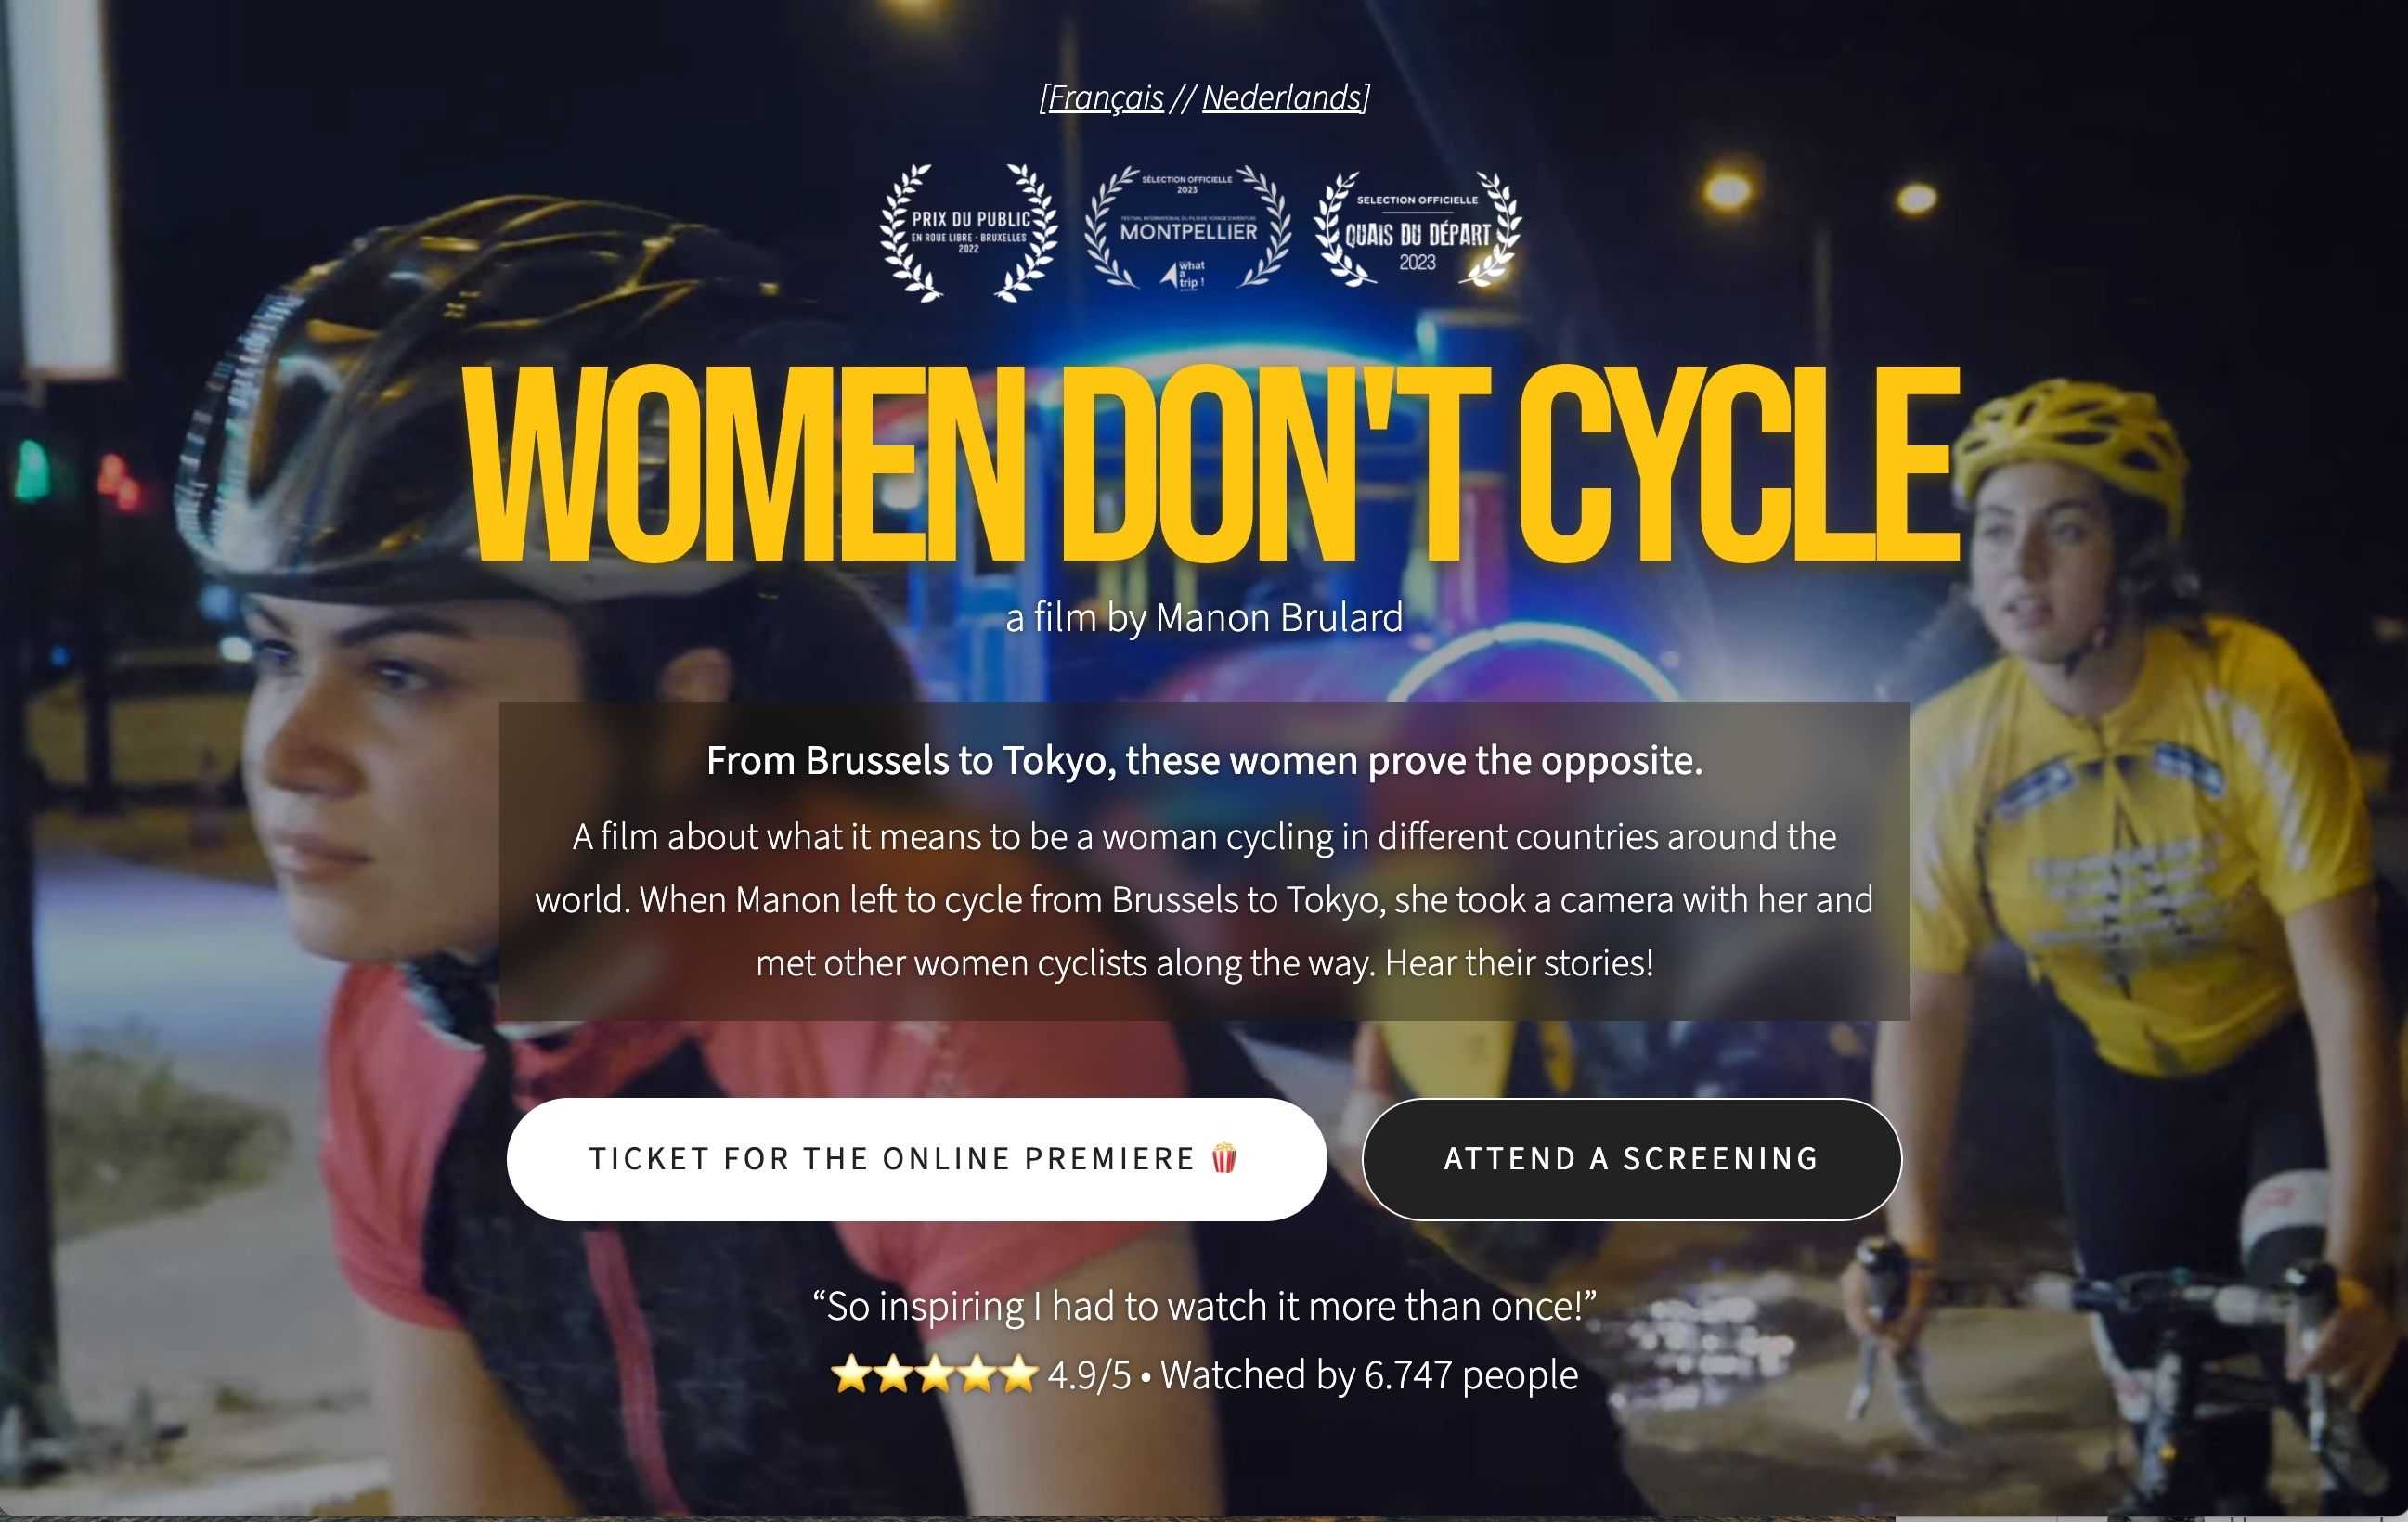 _Women Don't Cycle_ is a 2022 documentary by my Slowby co-founder [Manon Brulard](https://www.linkedin.com/in/manon-brulard). It is a film about what it means to be a woman cycling in different countries around the world.

The documentary was shot during an eleven-month bicycle touring trip from Brussels to Tokio, with our other co-founder [Dries](https://www.linkedin.com/in/driesvanransbeeck) ([more about their trip](https://roadtotherisingsun.be/)).